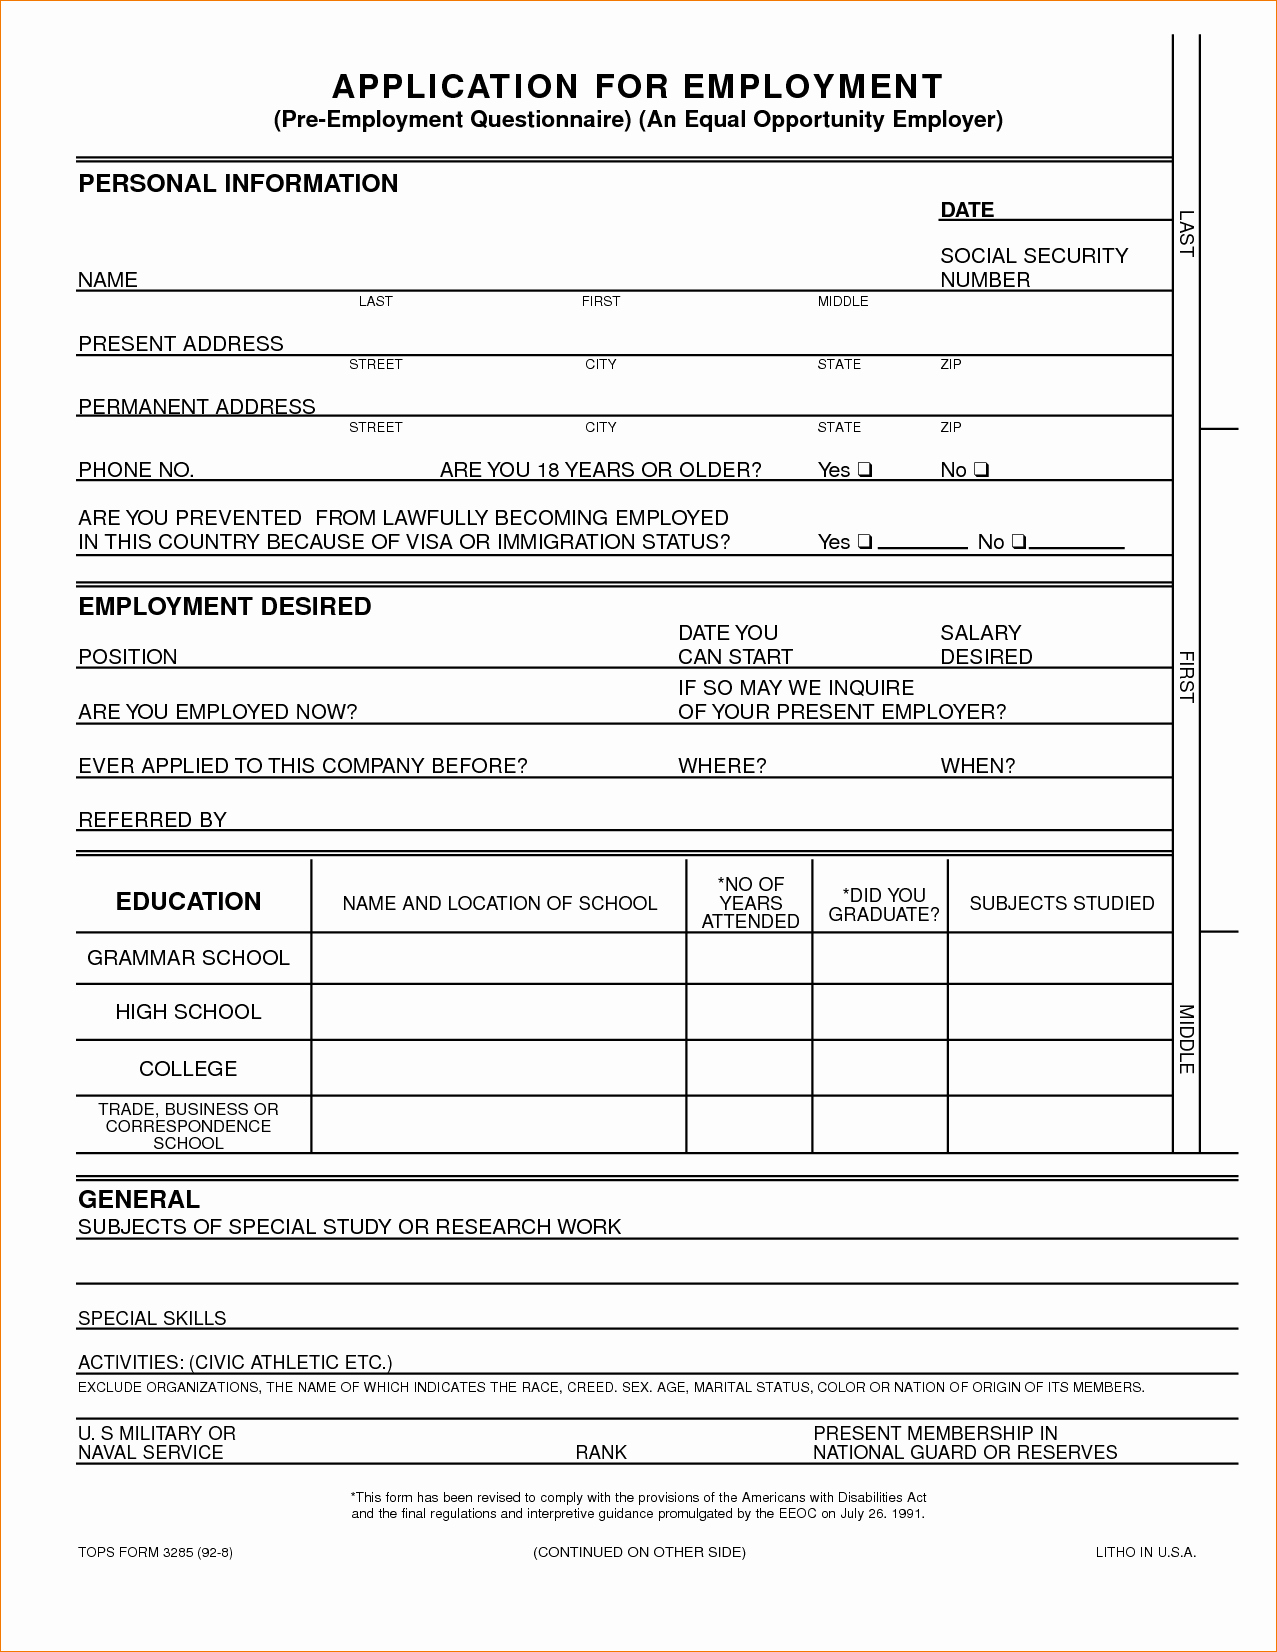 Application for Employment form Pdf New 7 Employment Application Template Pdfagenda Template